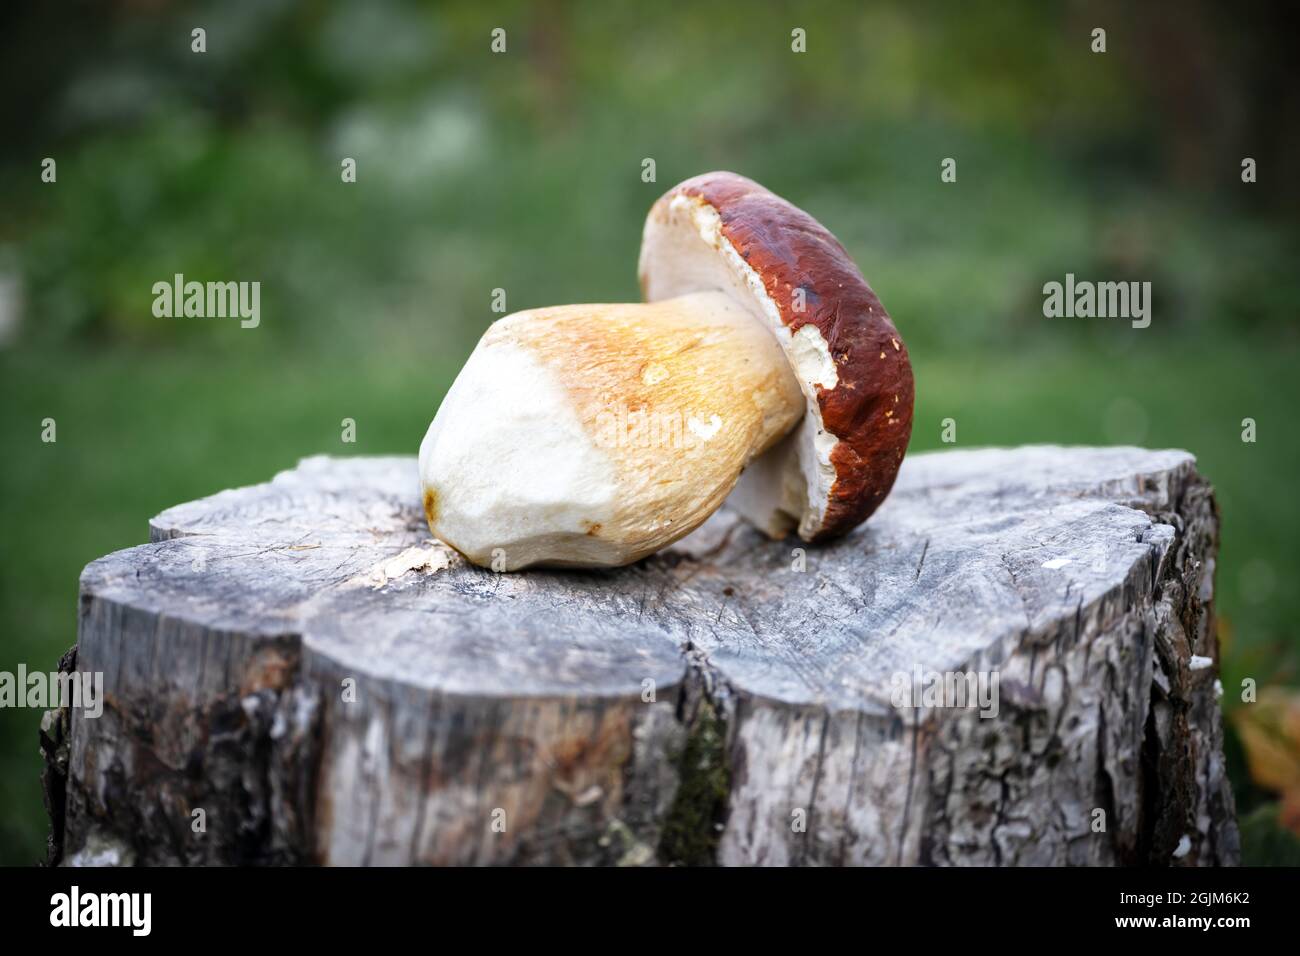 Big white mushroom porcini on wooden plate in autumn garden. Food photography Stock Photo